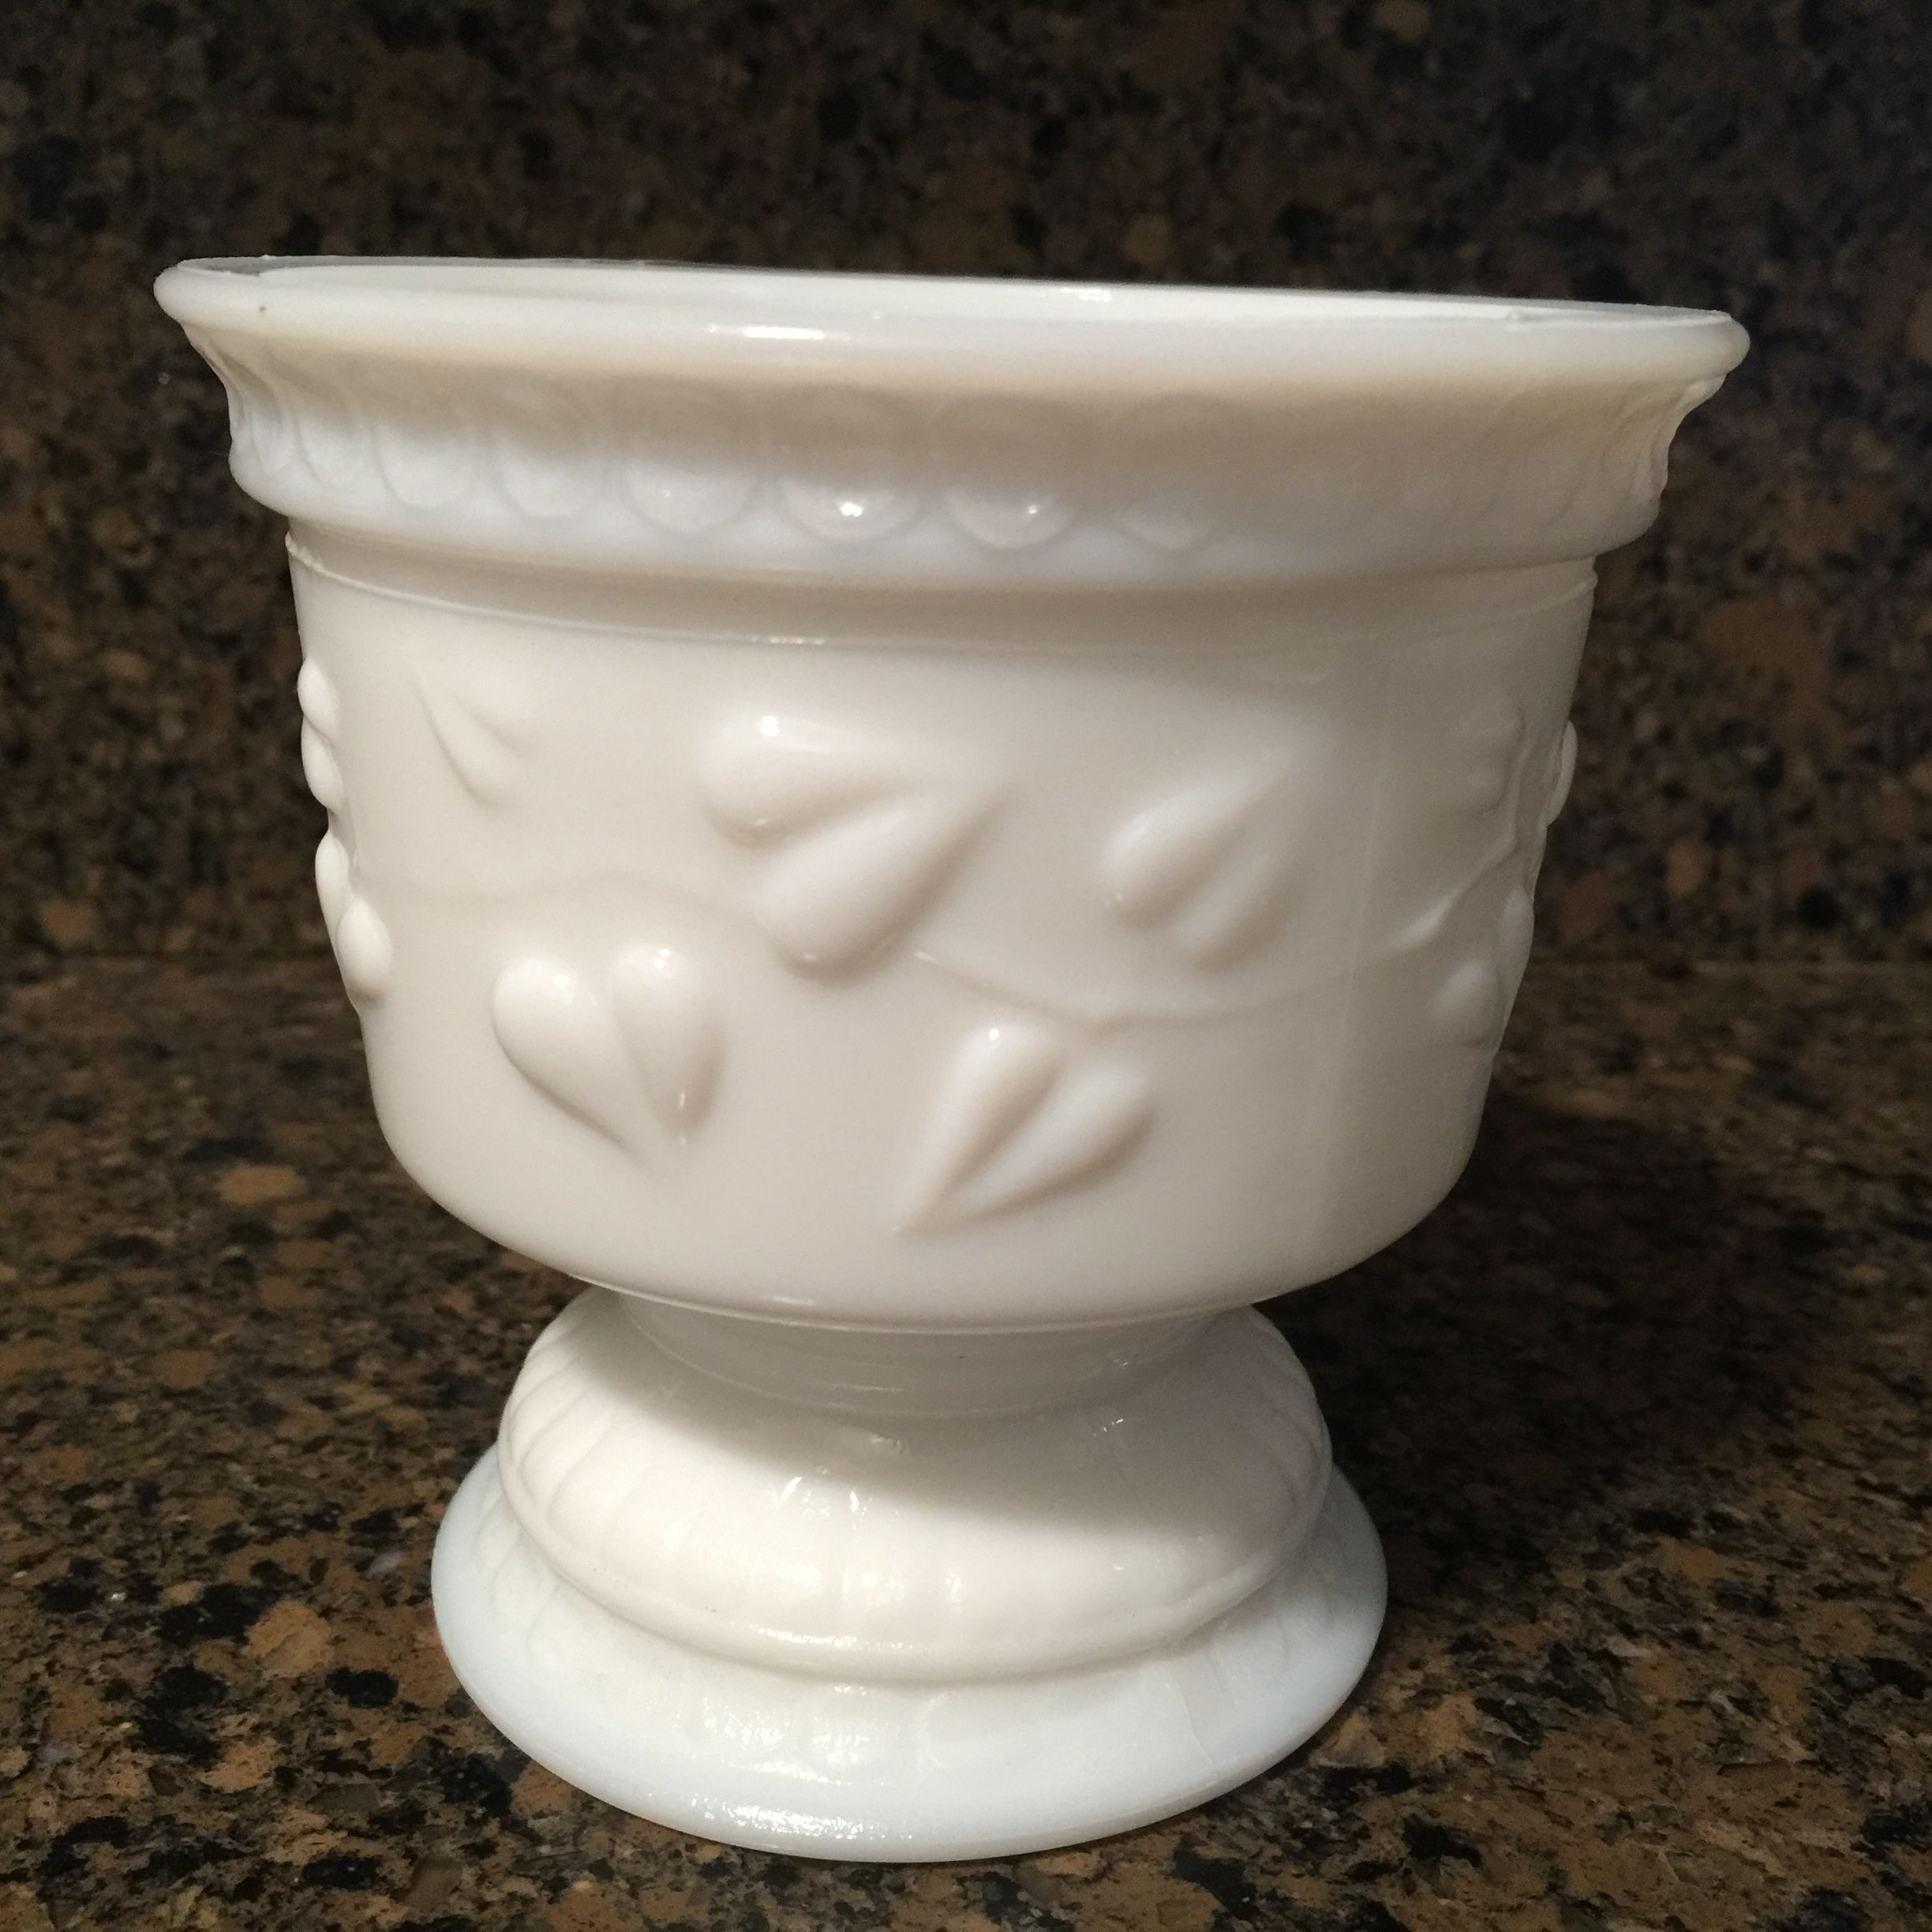 30 Stylish Fenton Hobnail Bud Vase 2024 free download fenton hobnail bud vase of milk glass leaves ivy heart pattern pedestal compote a few within milk glass leaves ivy heart pattern pedestal compote